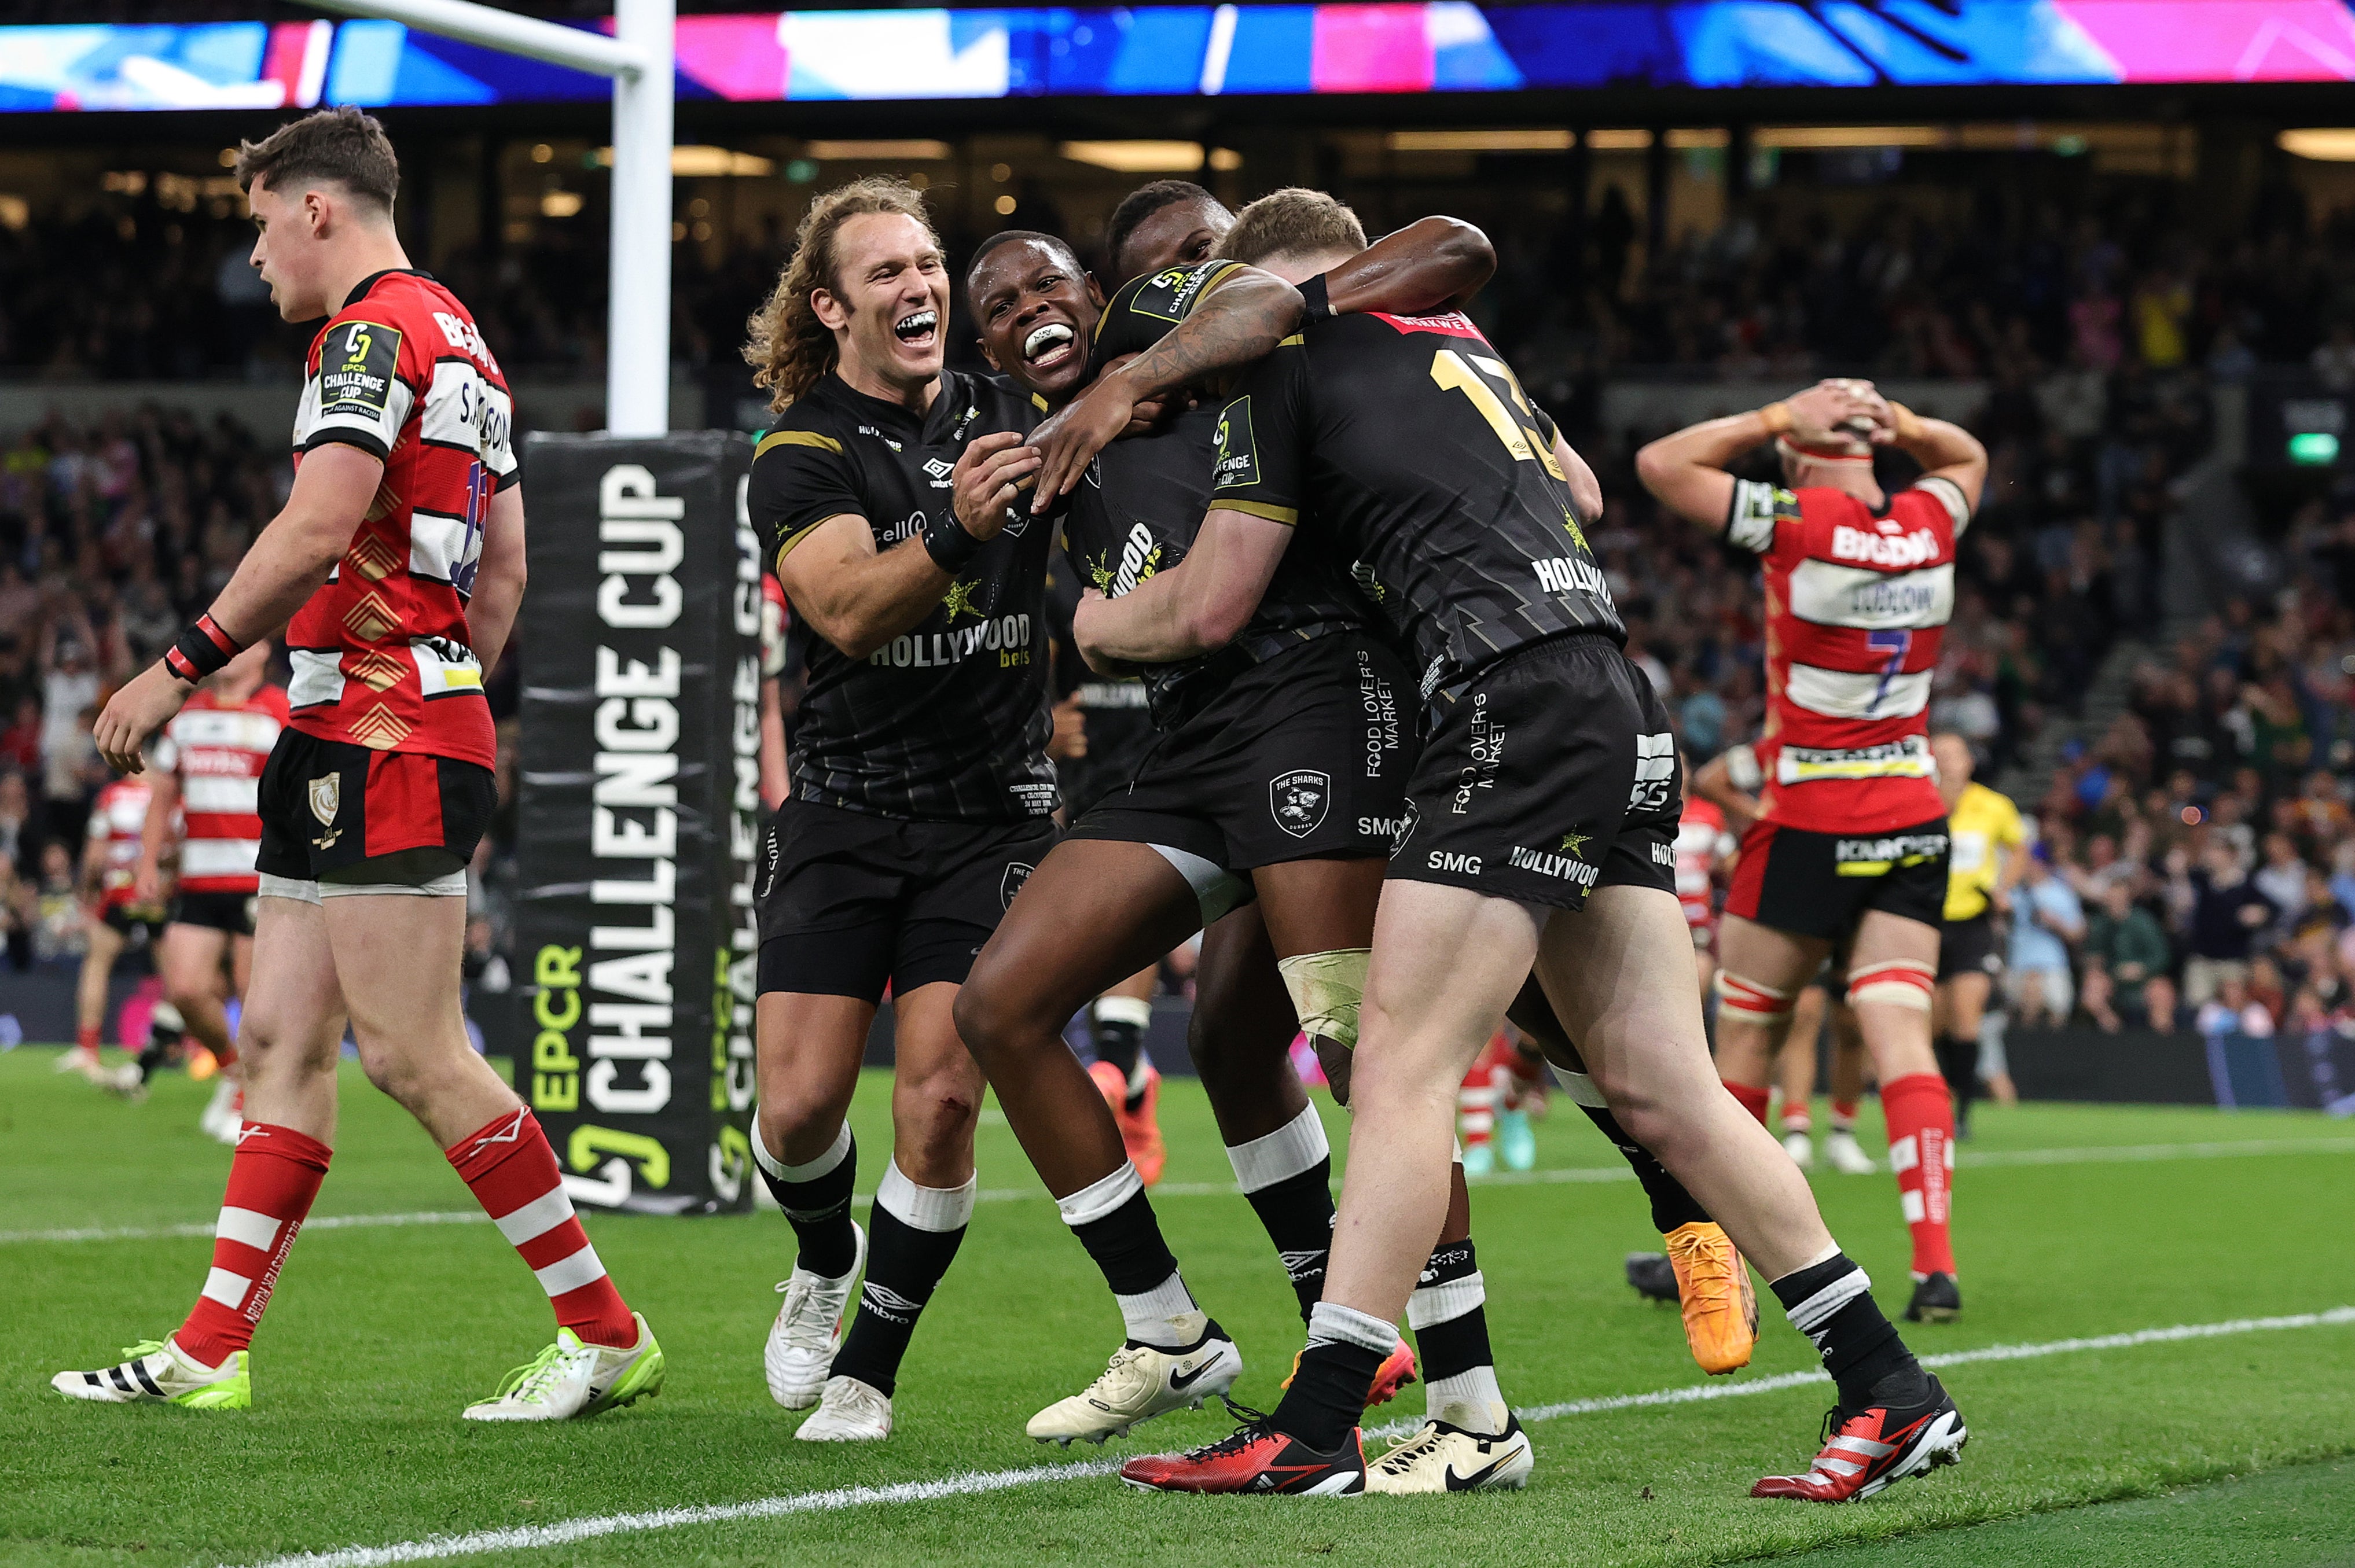 The Sharks made history as the first South African side to win the Challenge Cup